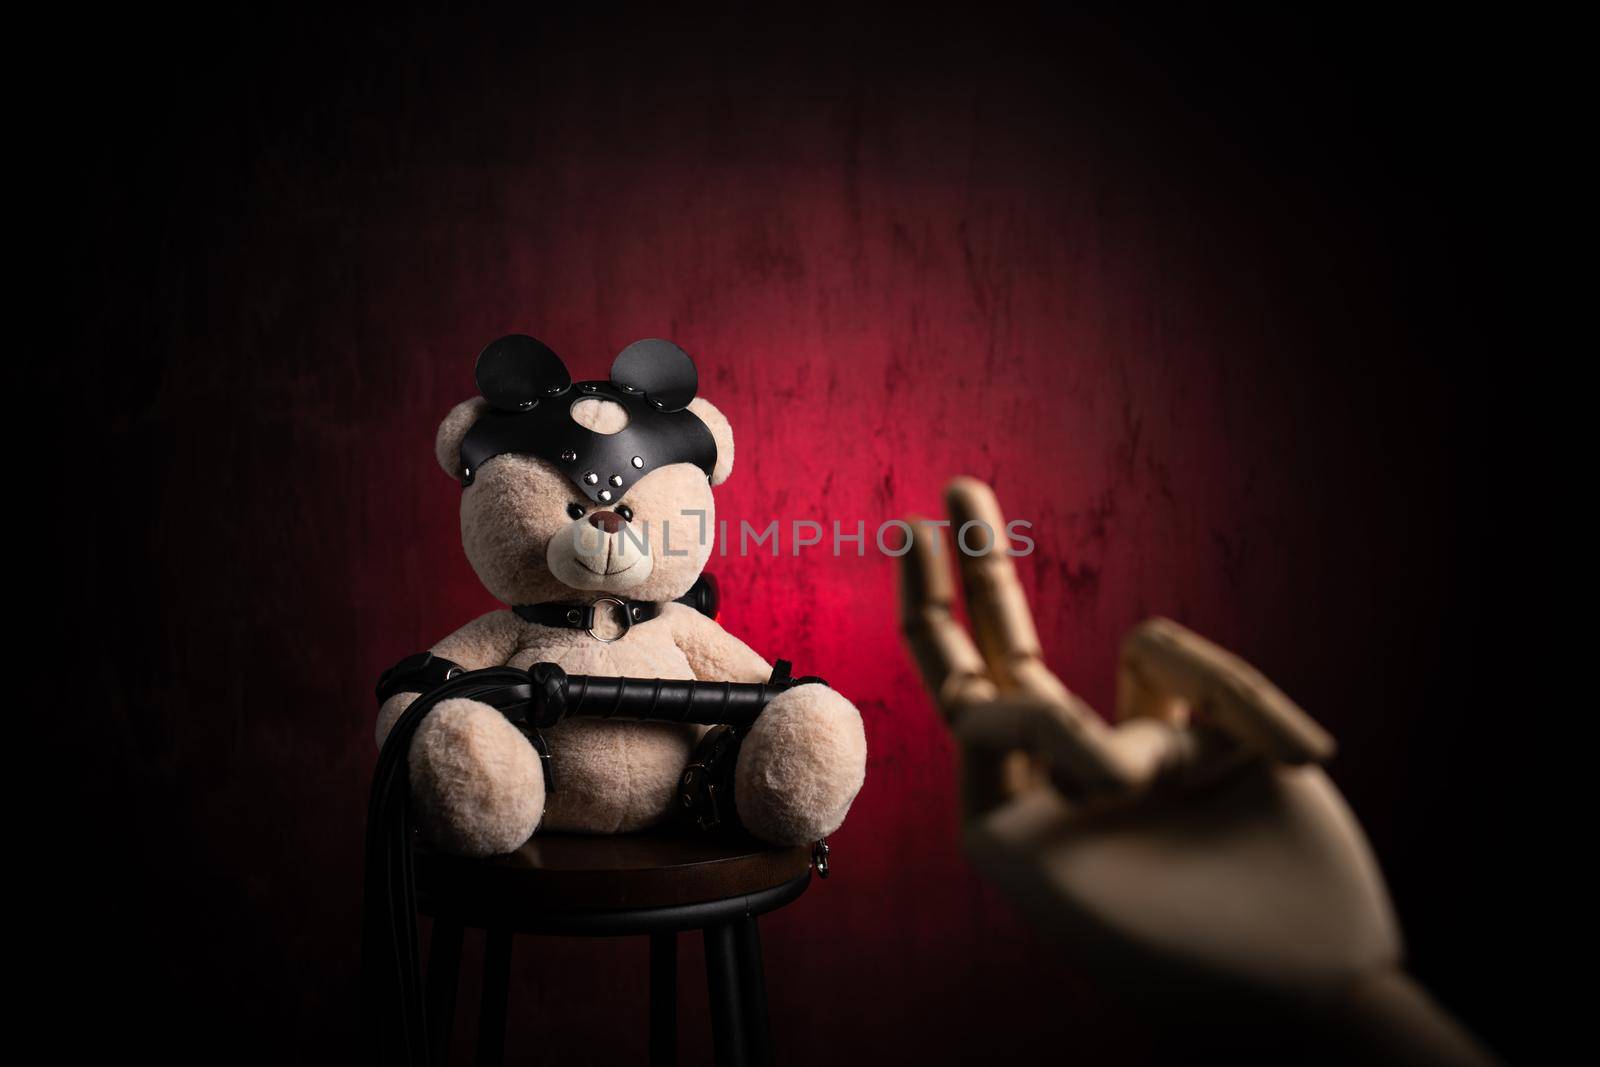 a toy teddy bear with a whip, dressed in leather belts and a mask, an accessory for BDSM games with a wooden hand and a sexual gesture by Rotozey